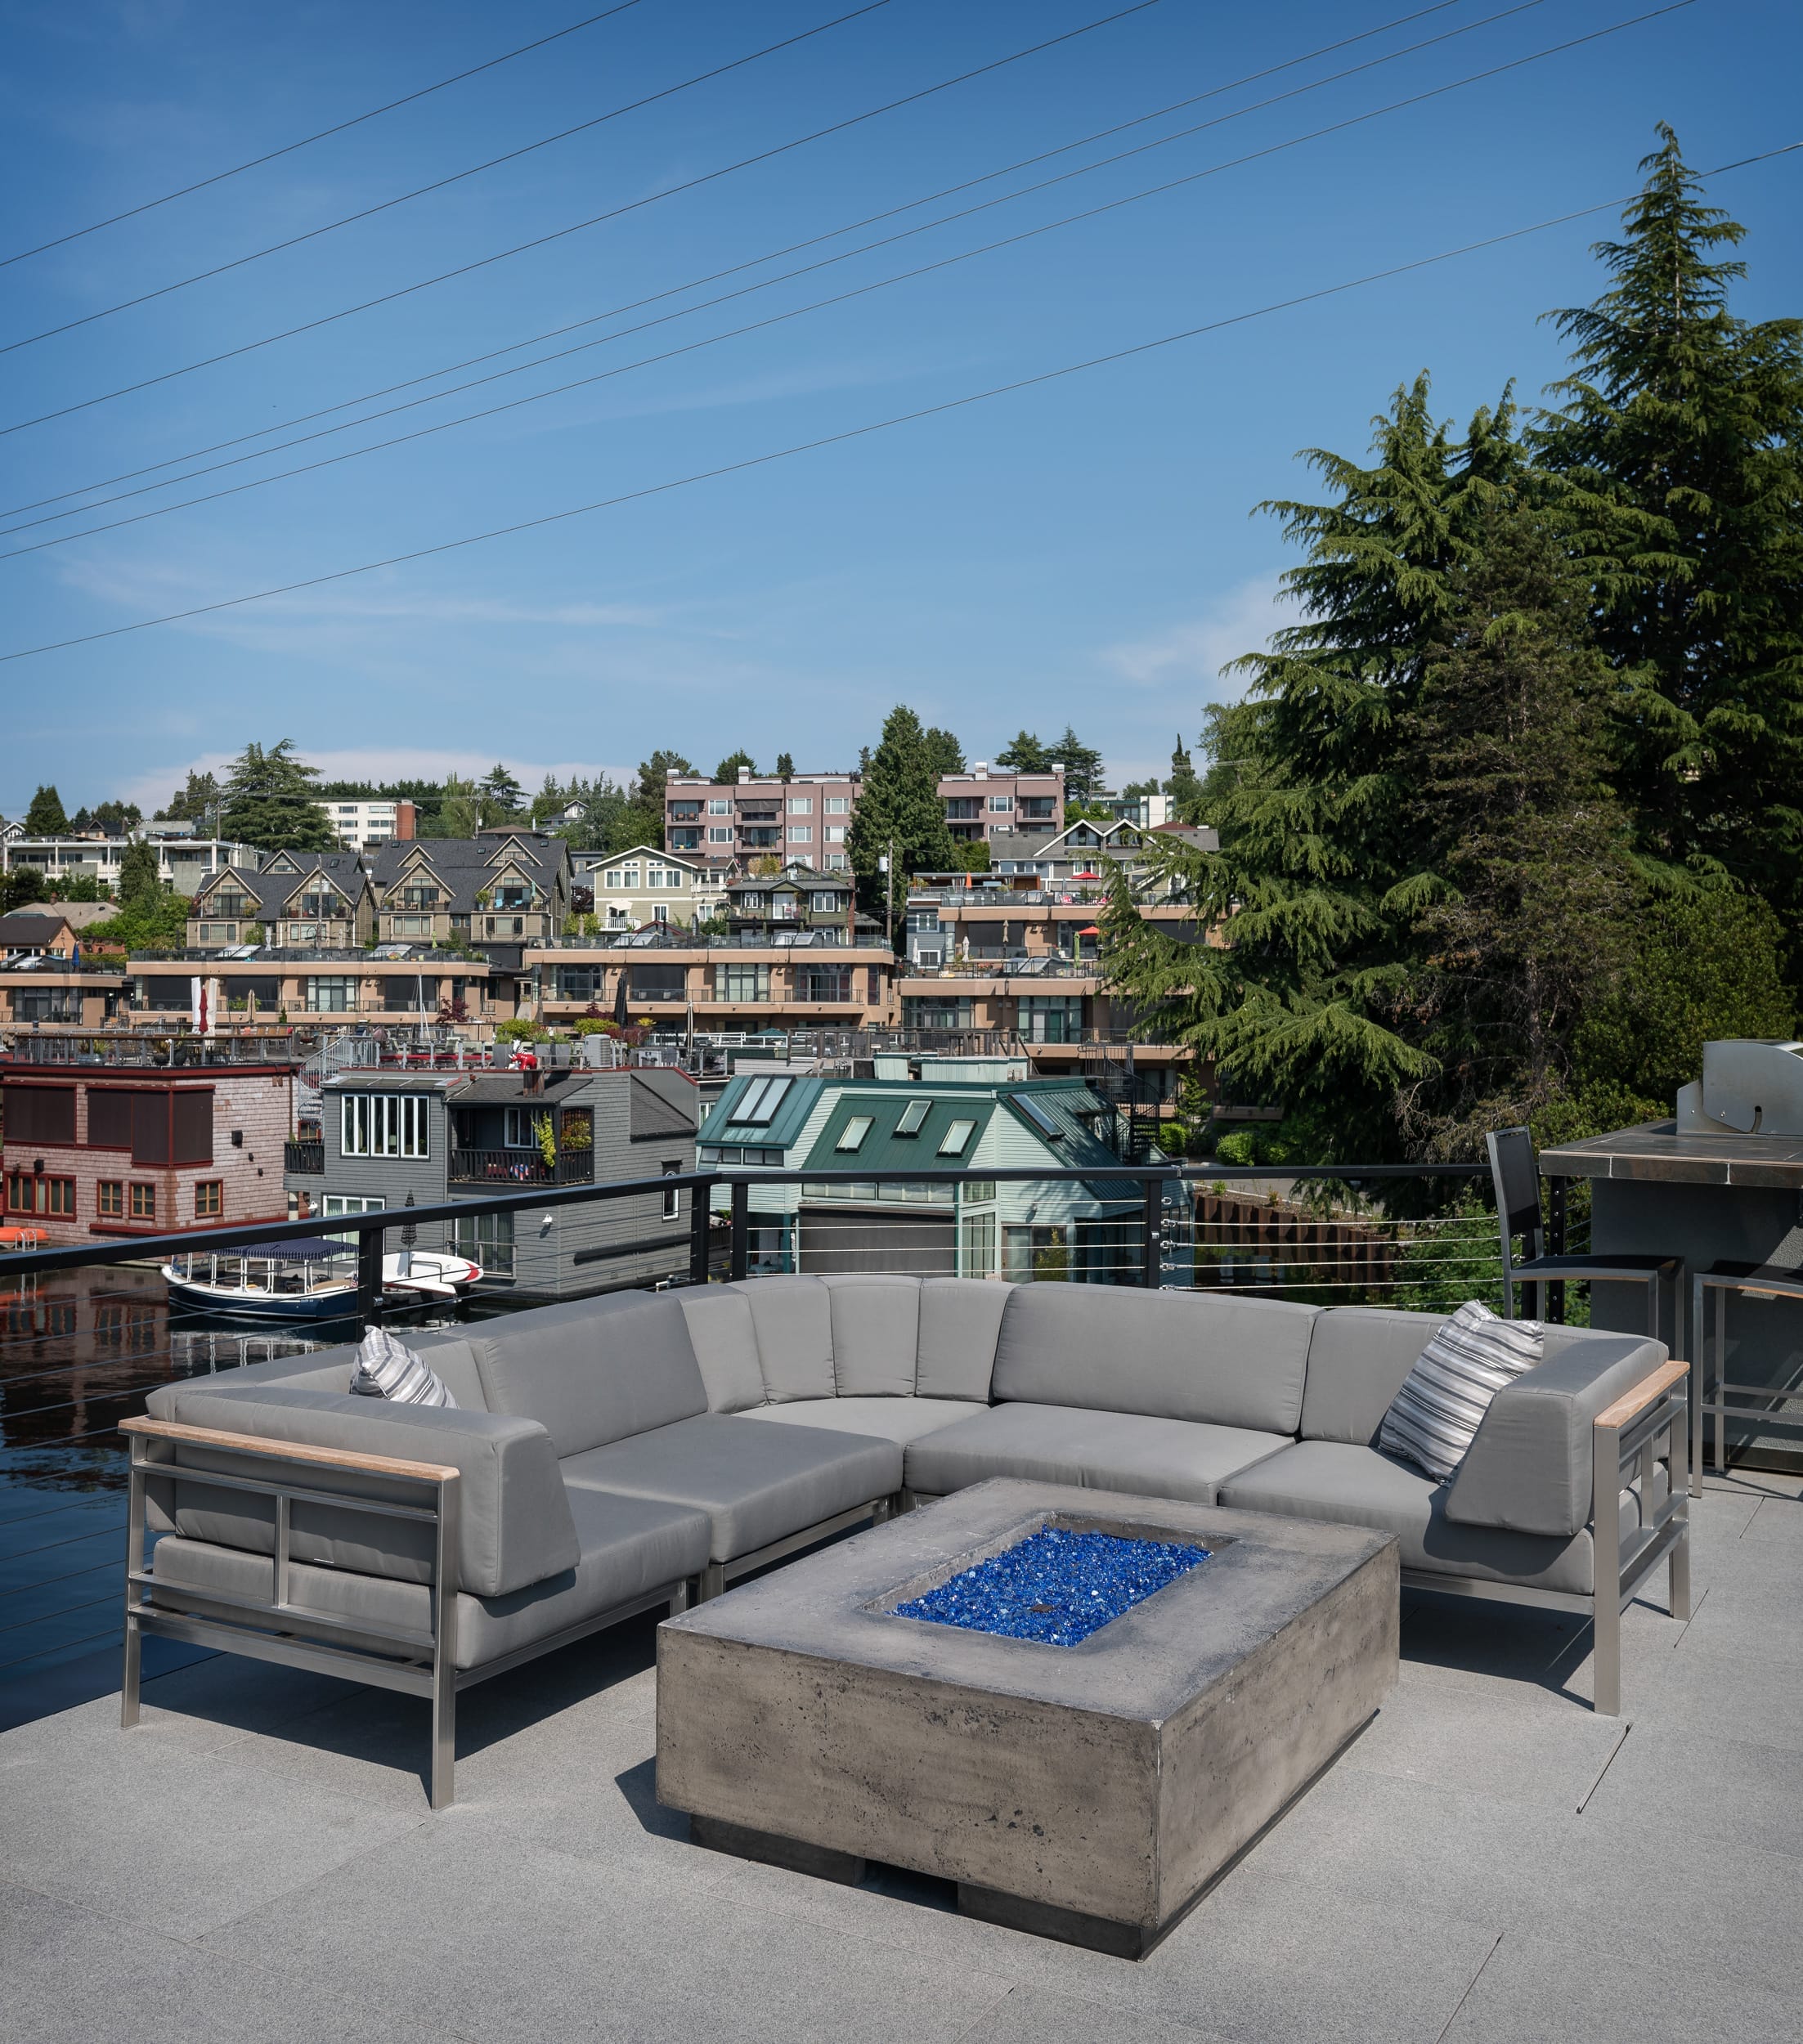 A modern gray couch on a deck overlooking a city.